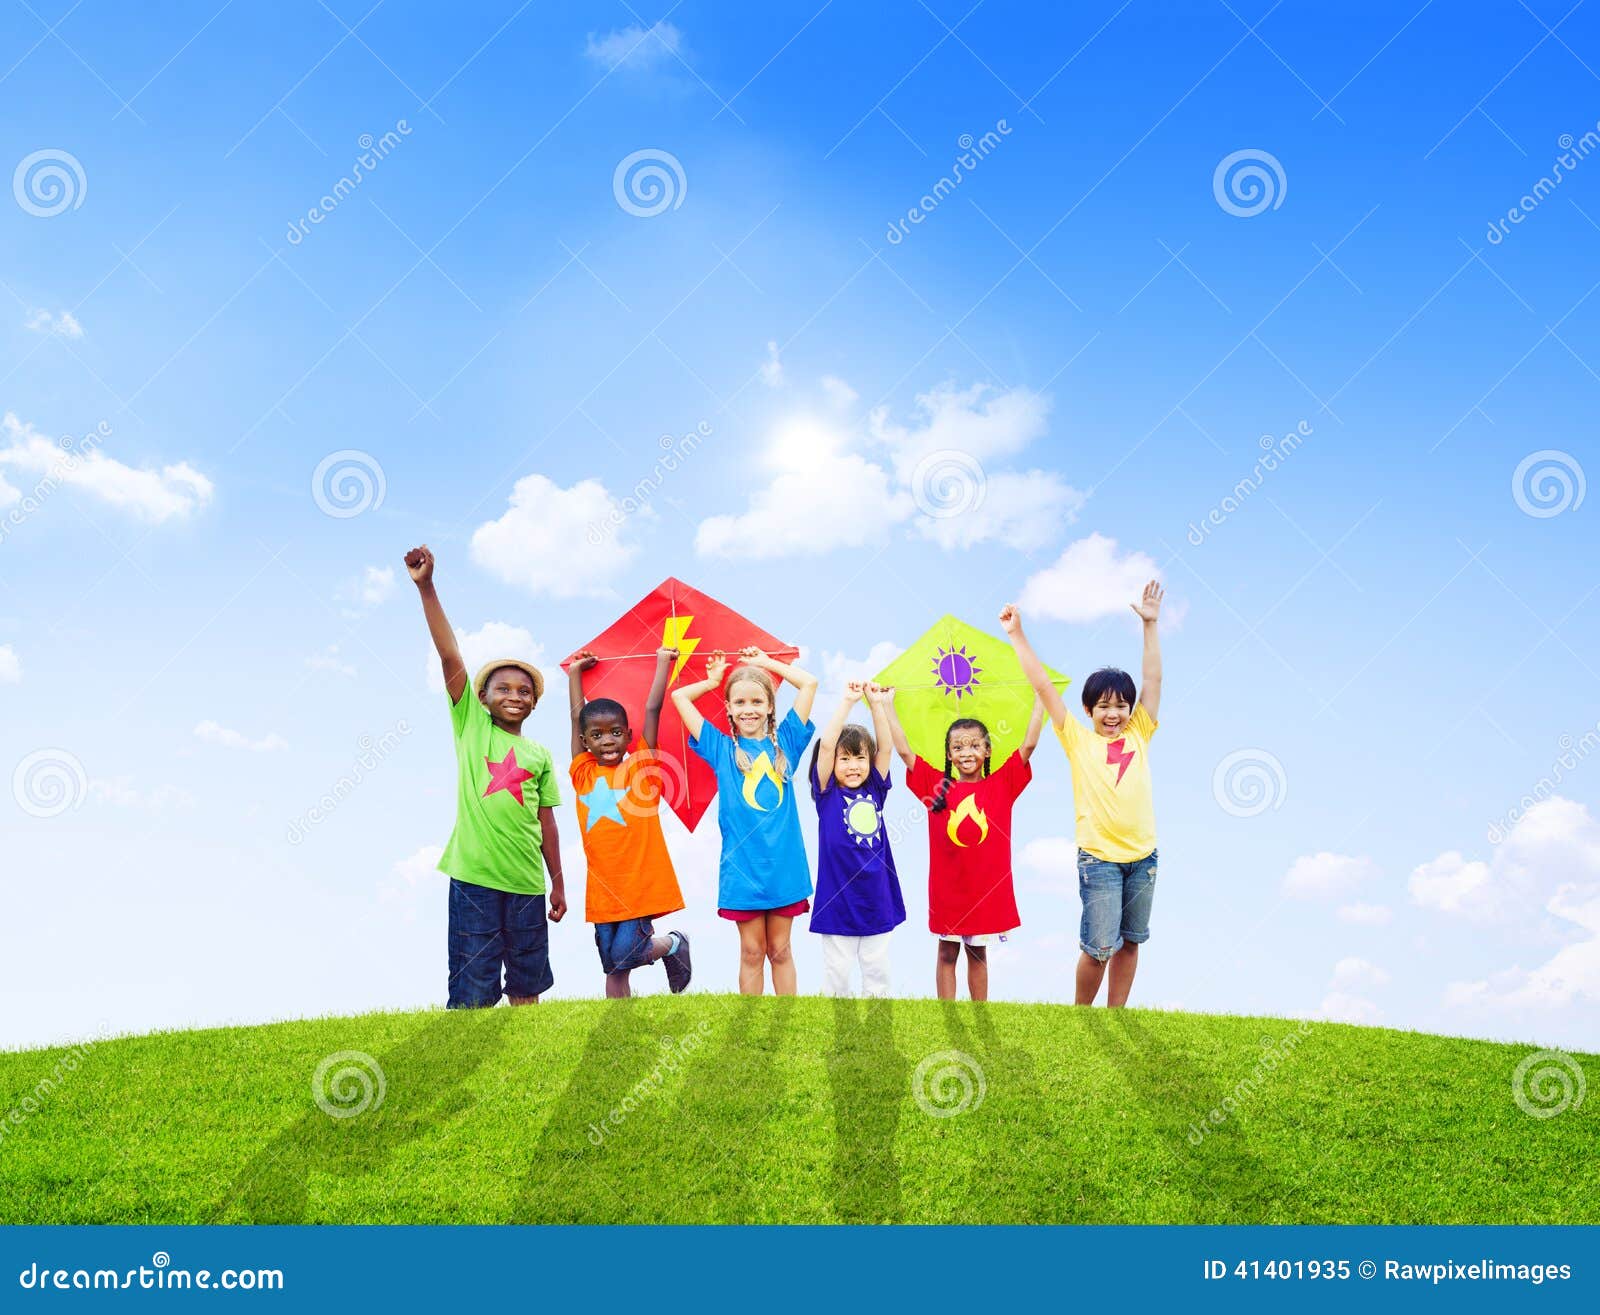 group of children playing kites together